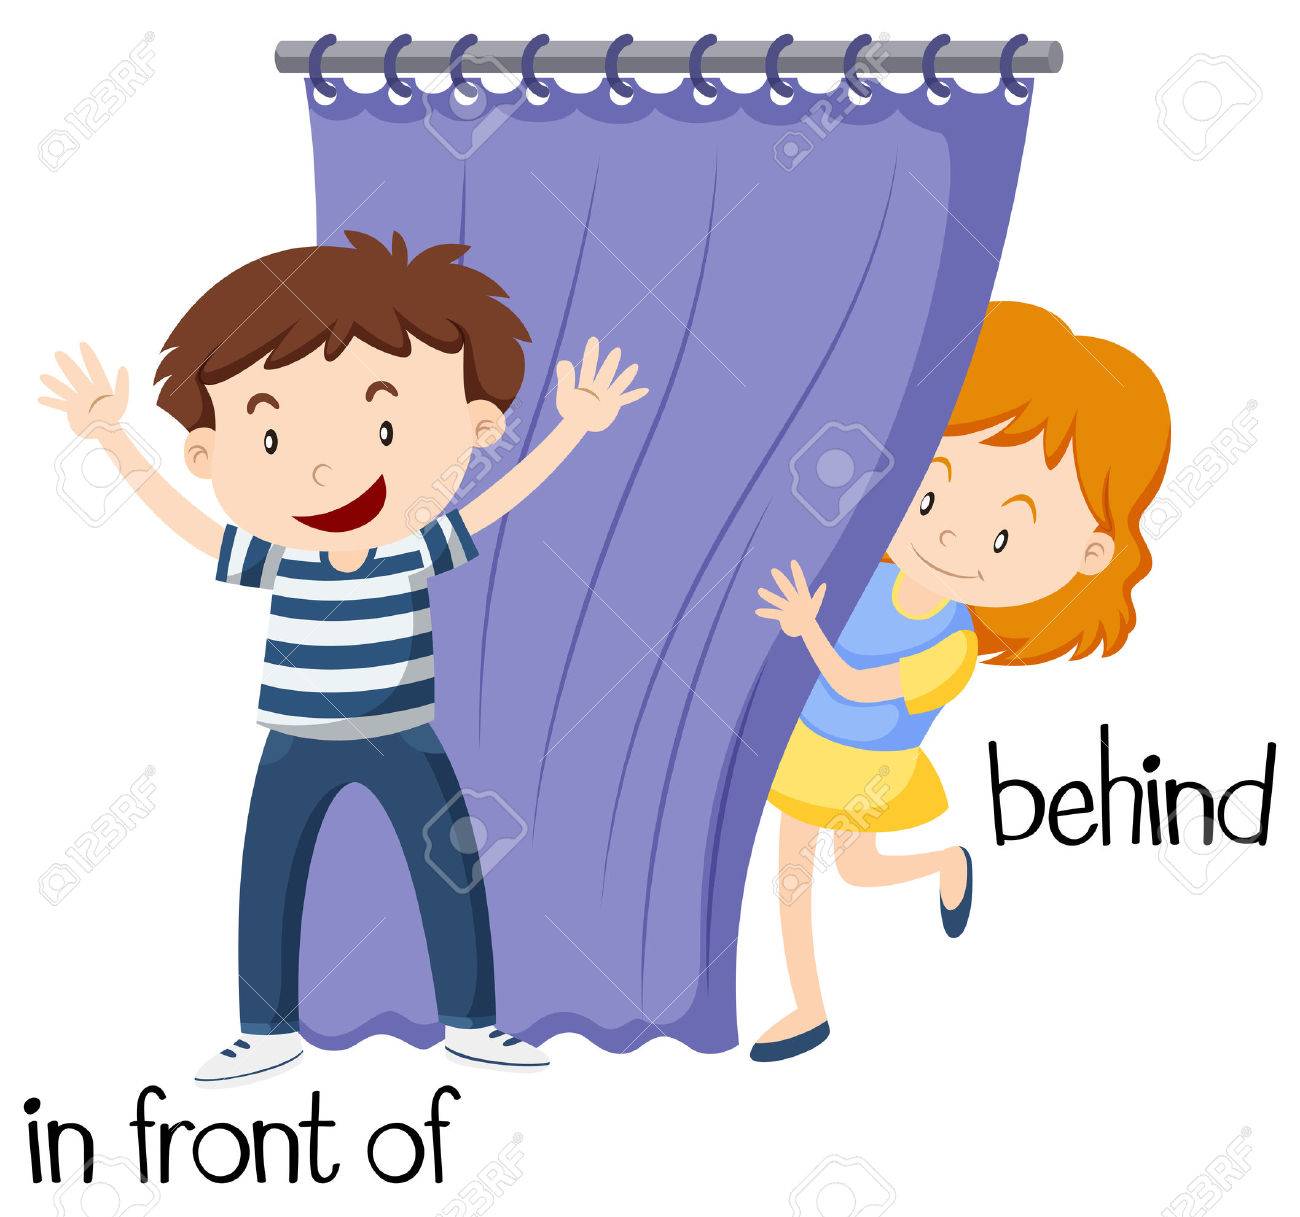 Opposite words for in front of and behind illustration.